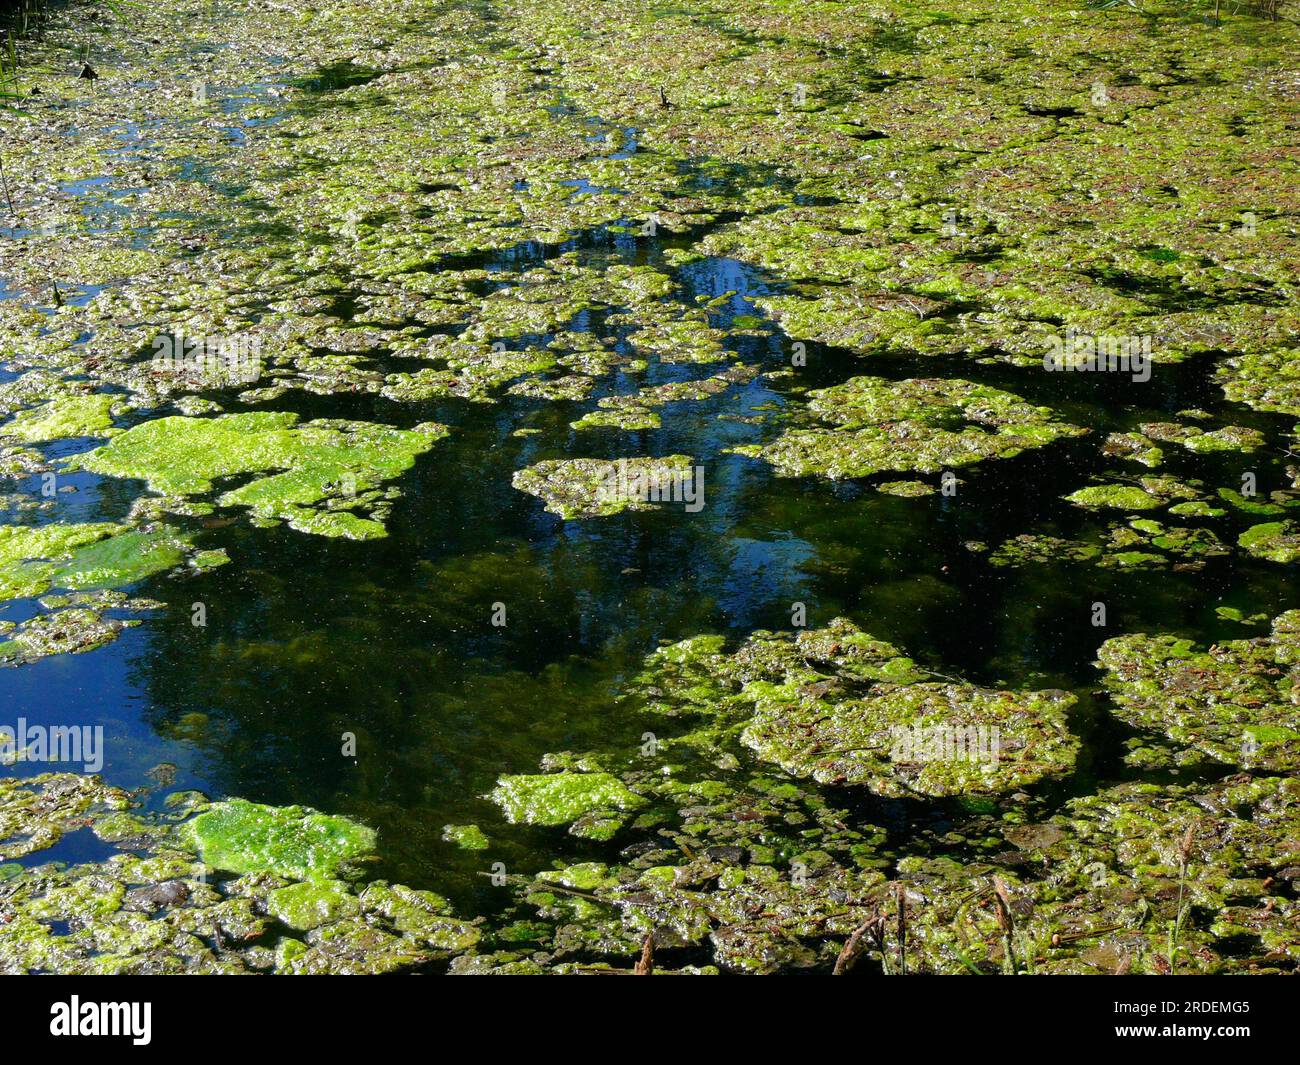 Pond with lily pads and algae Stock Photo